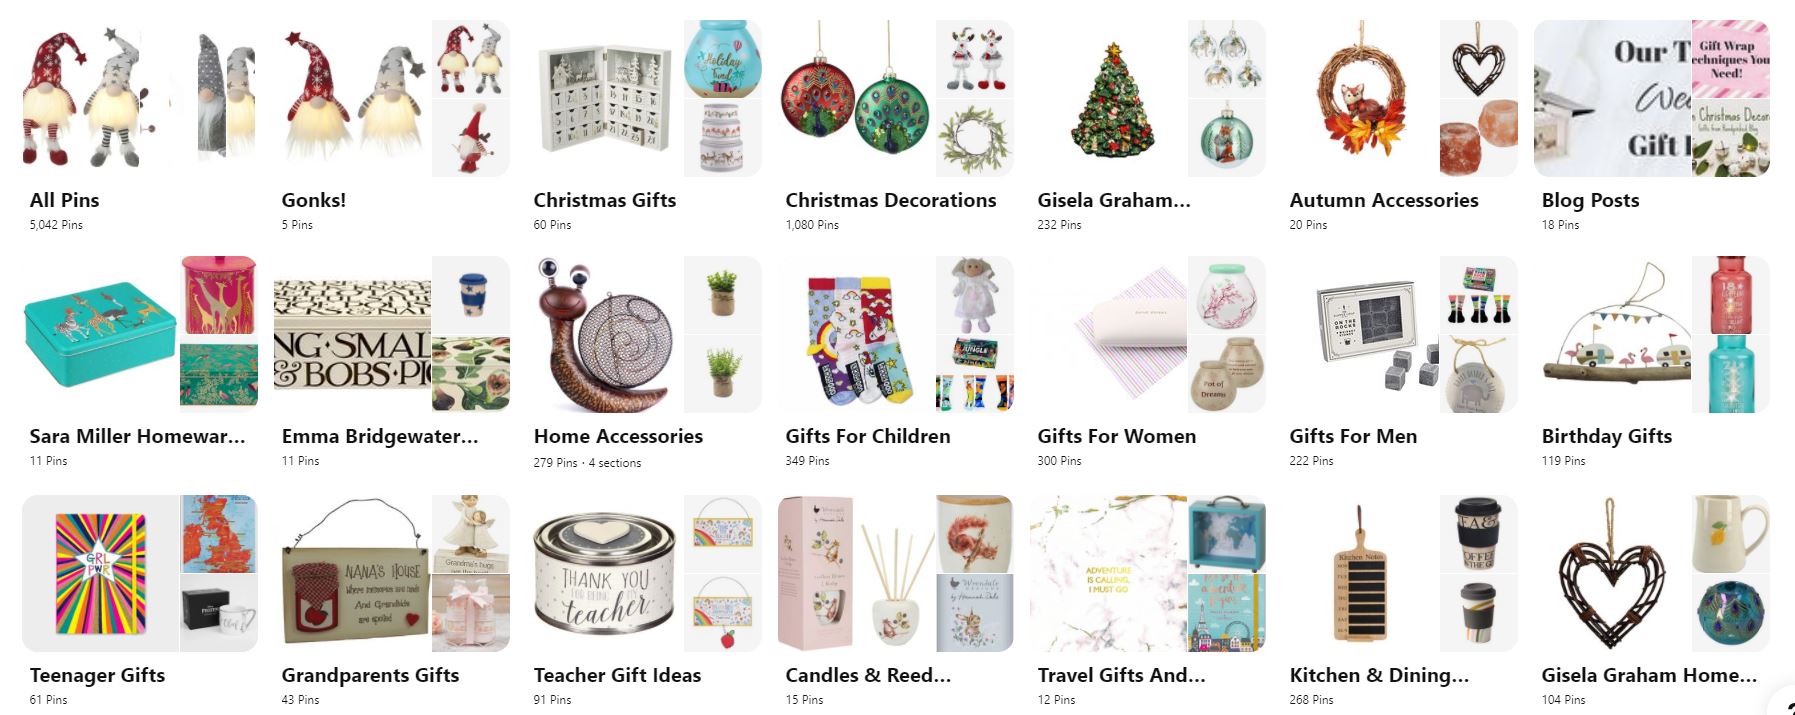 Gifts from Handpicked Pinterest Page